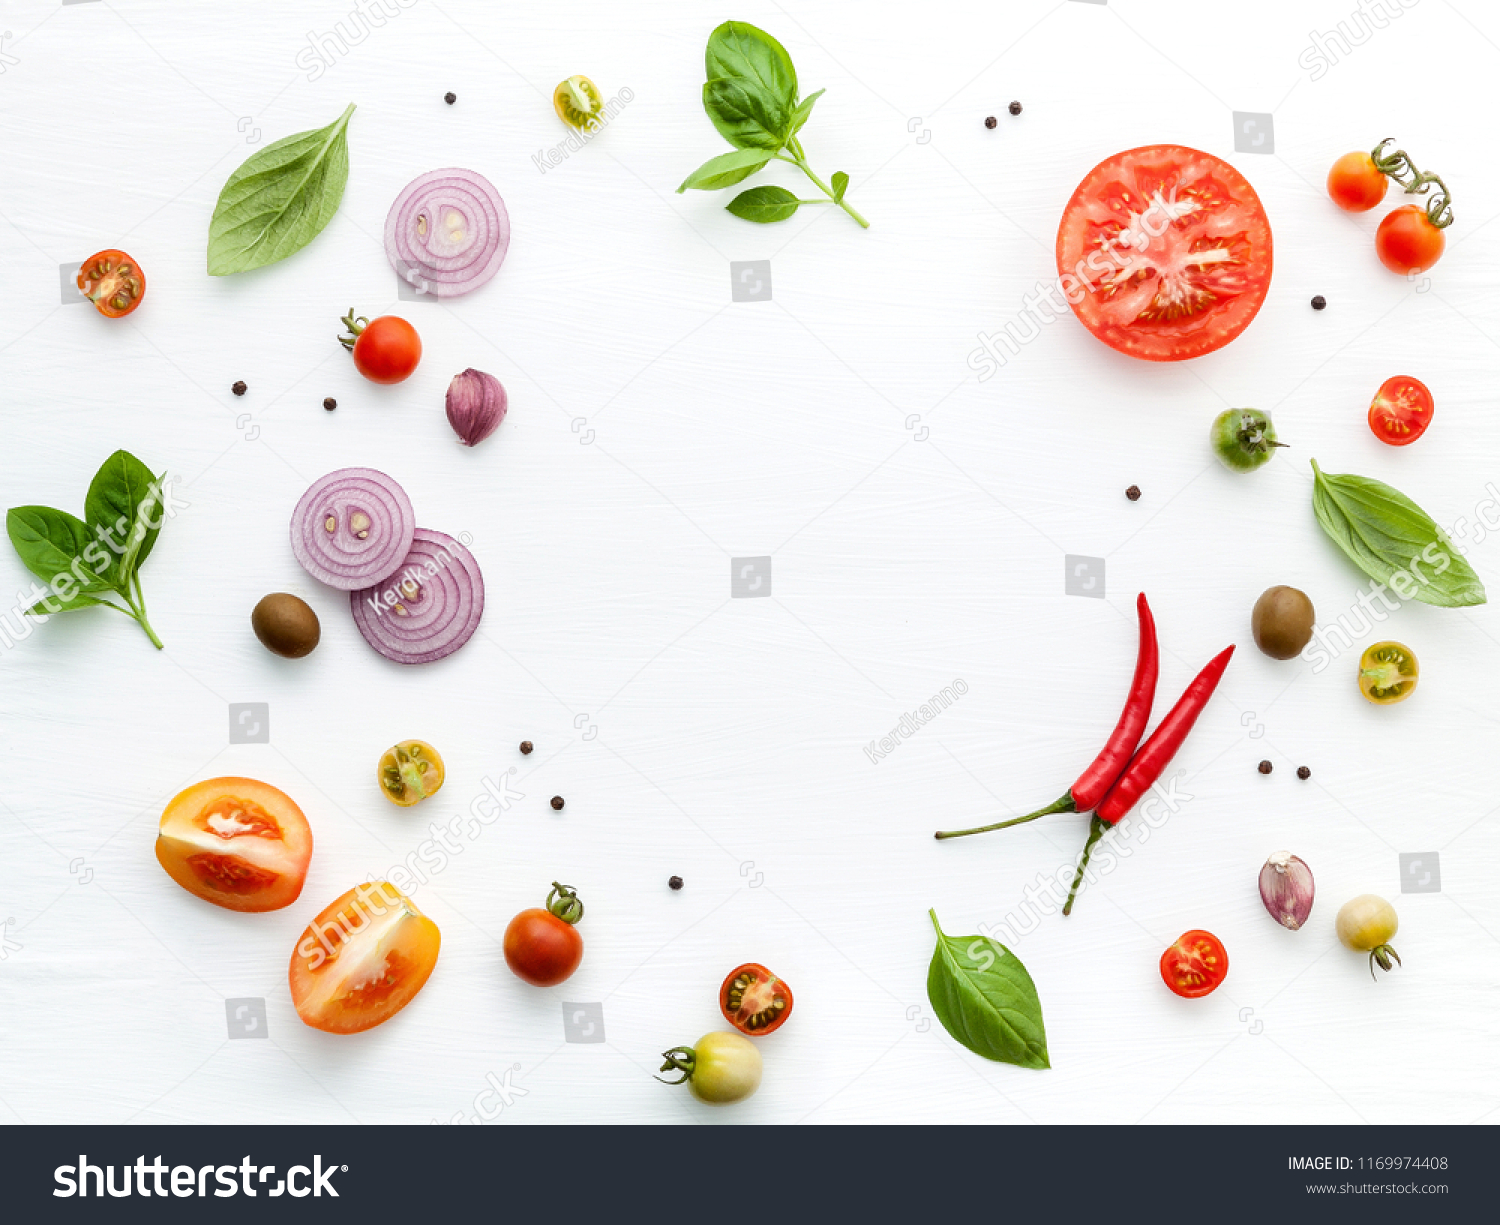 The ingredients for homemade pizza on white wooden background. #1169974408